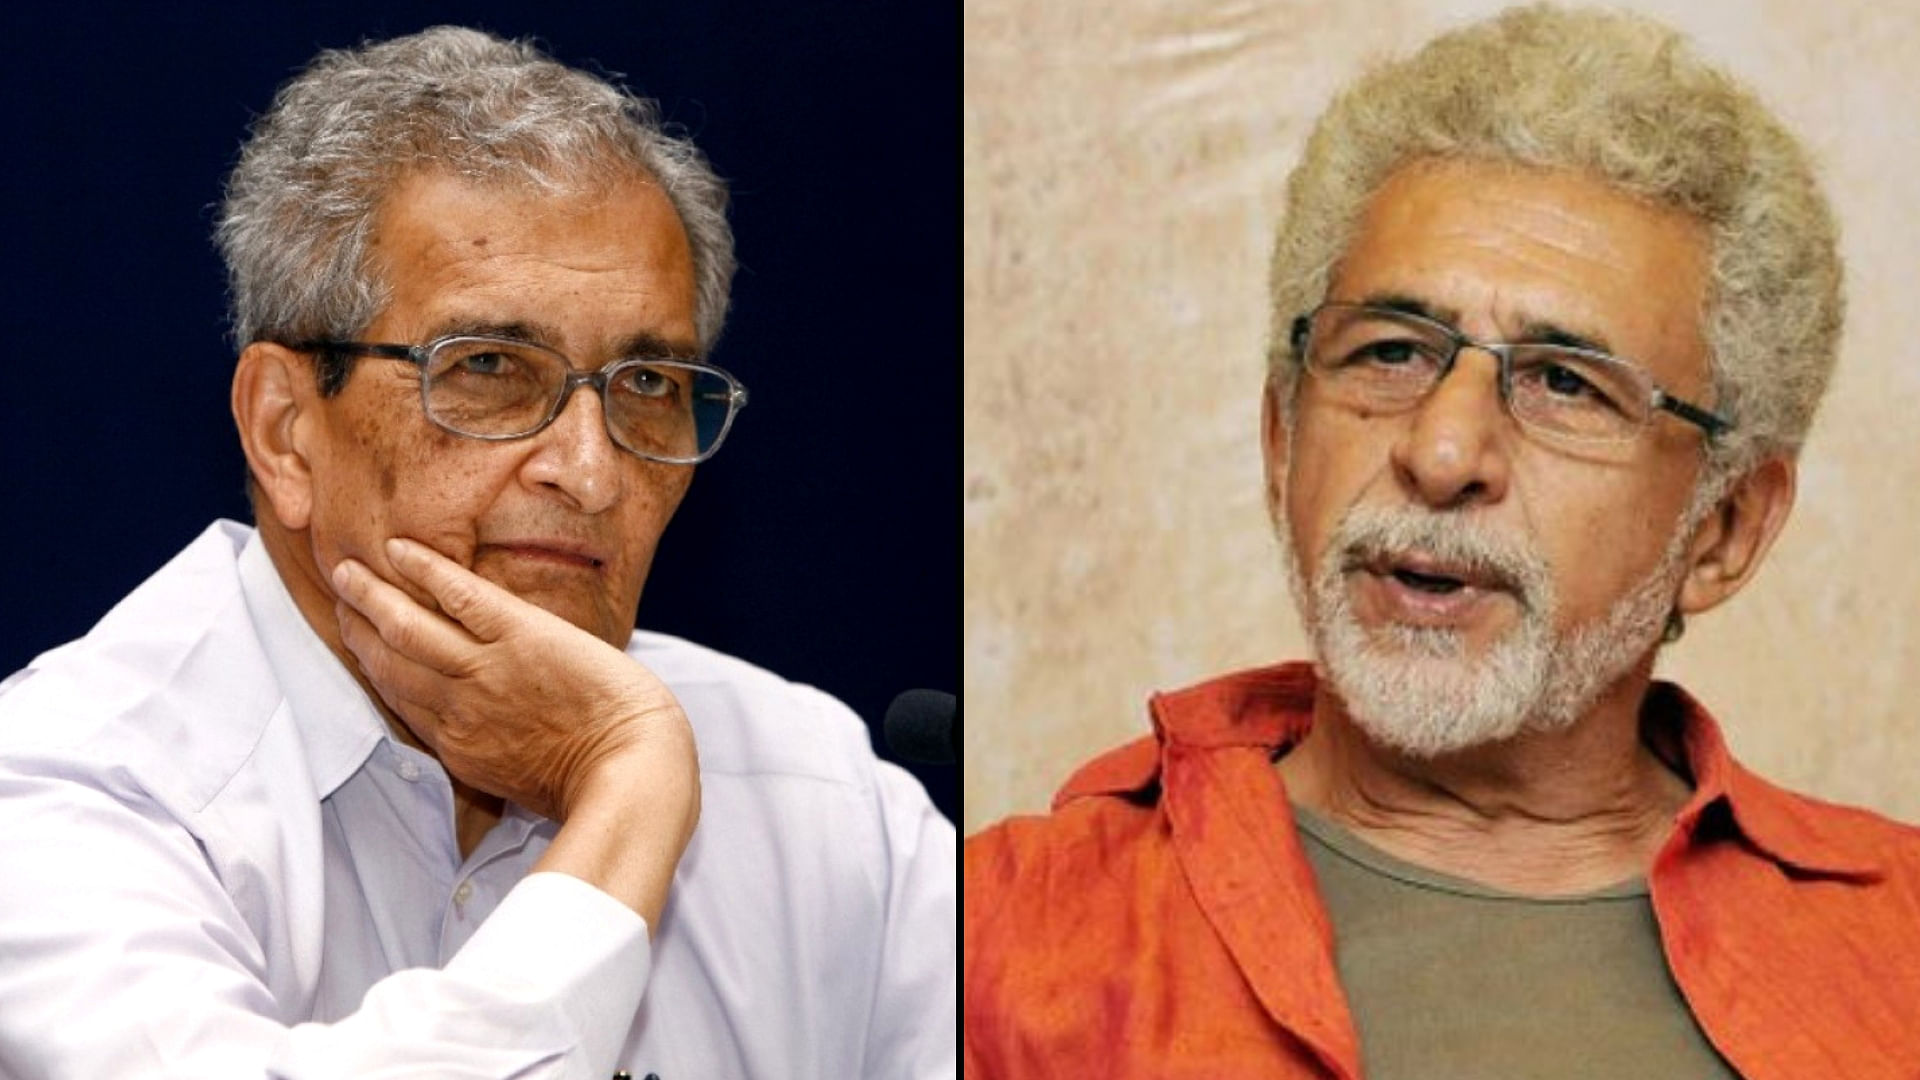 Amartya Sen came out in support of actor Naseeruddin Shah after his controversial remark.